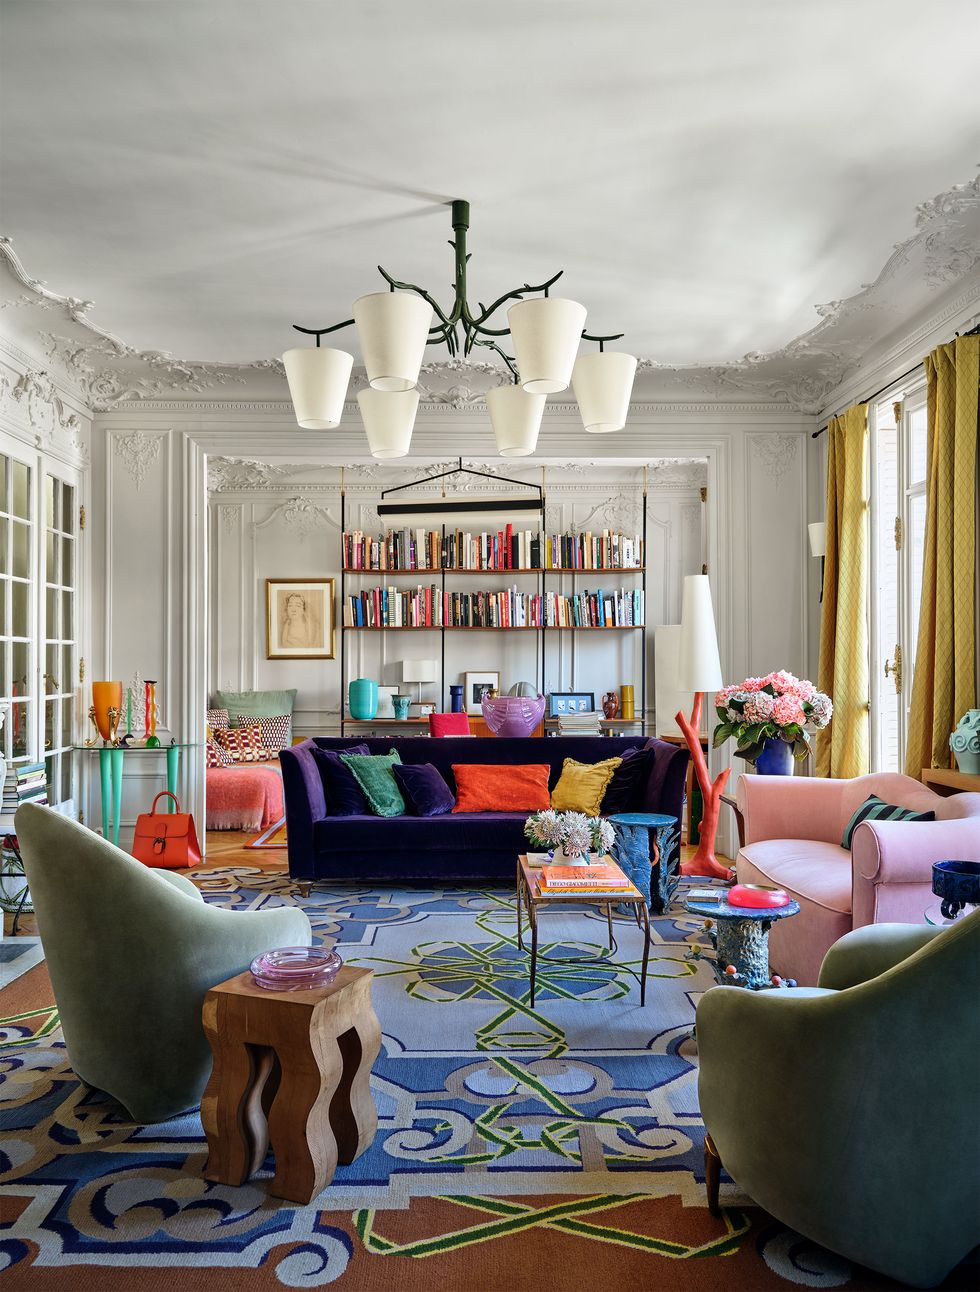 a salon has a six cup chandelier in center, bookshelves in background, a purple and a pink sofa, two upholstered armchairs, a floor lamp with branch shaped vase, several side tables, blue patterned rug